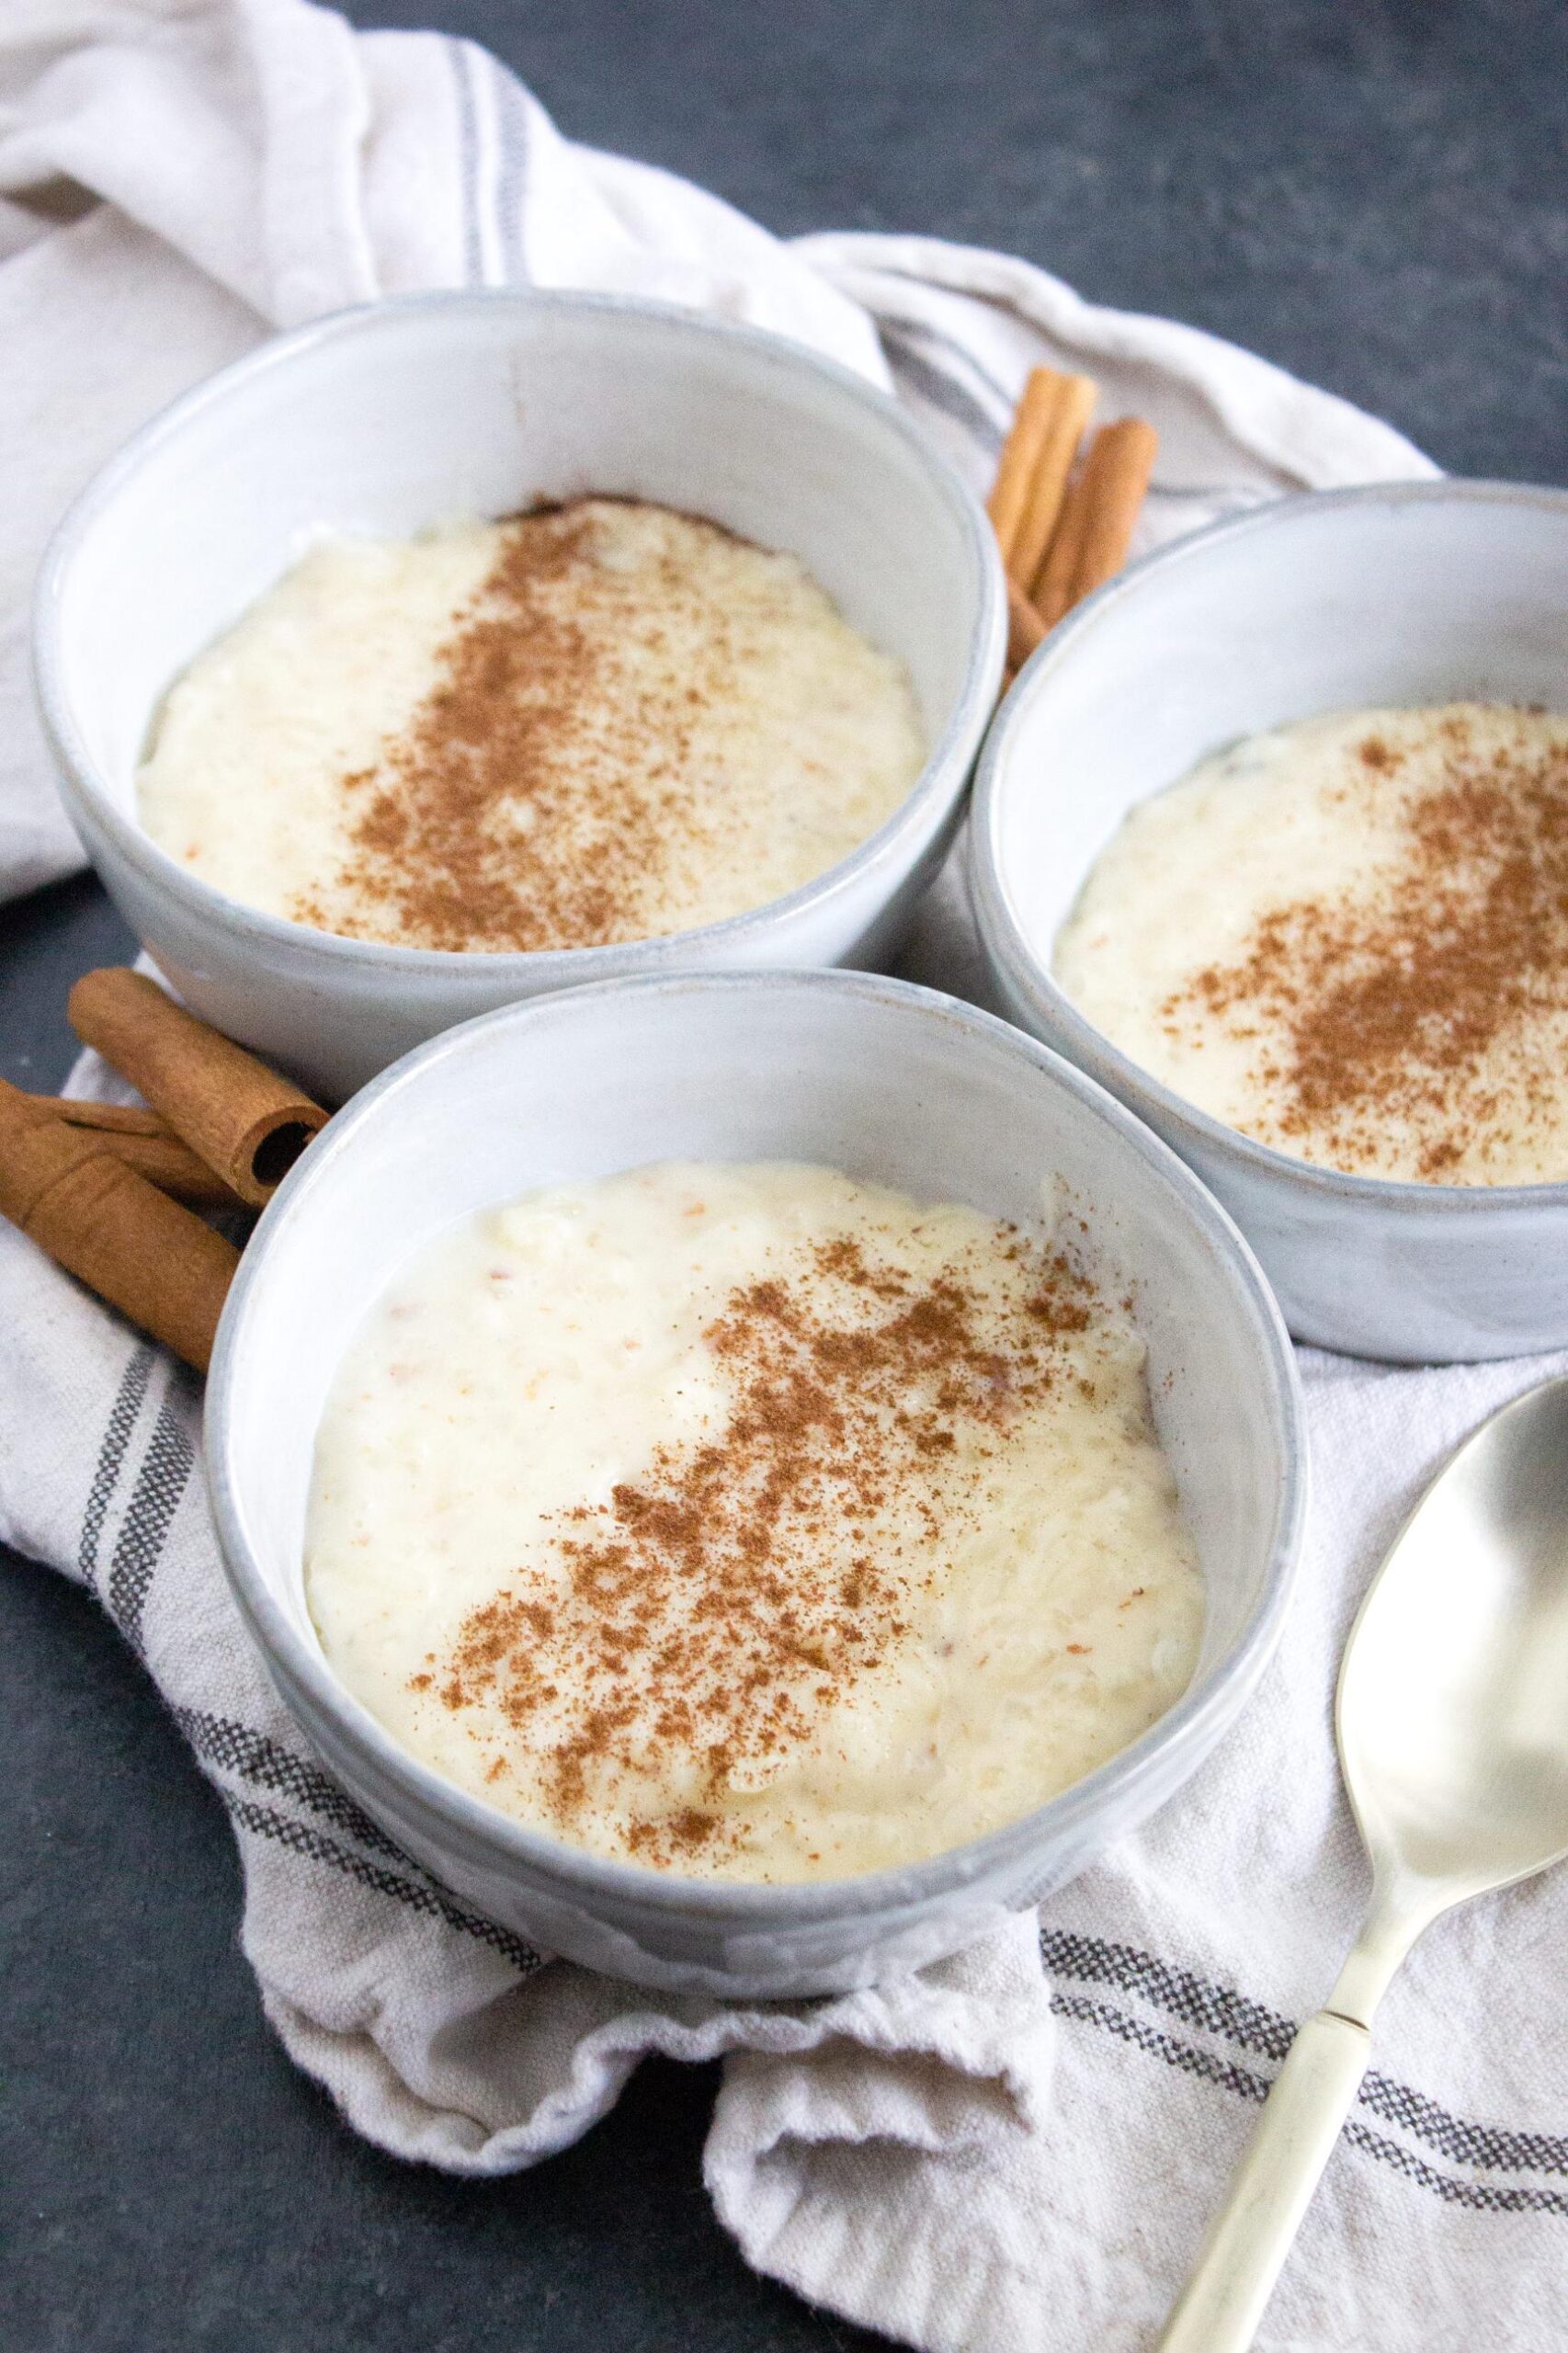 3. This Cuban Rice Pudding is a family recipe passed down from generations.